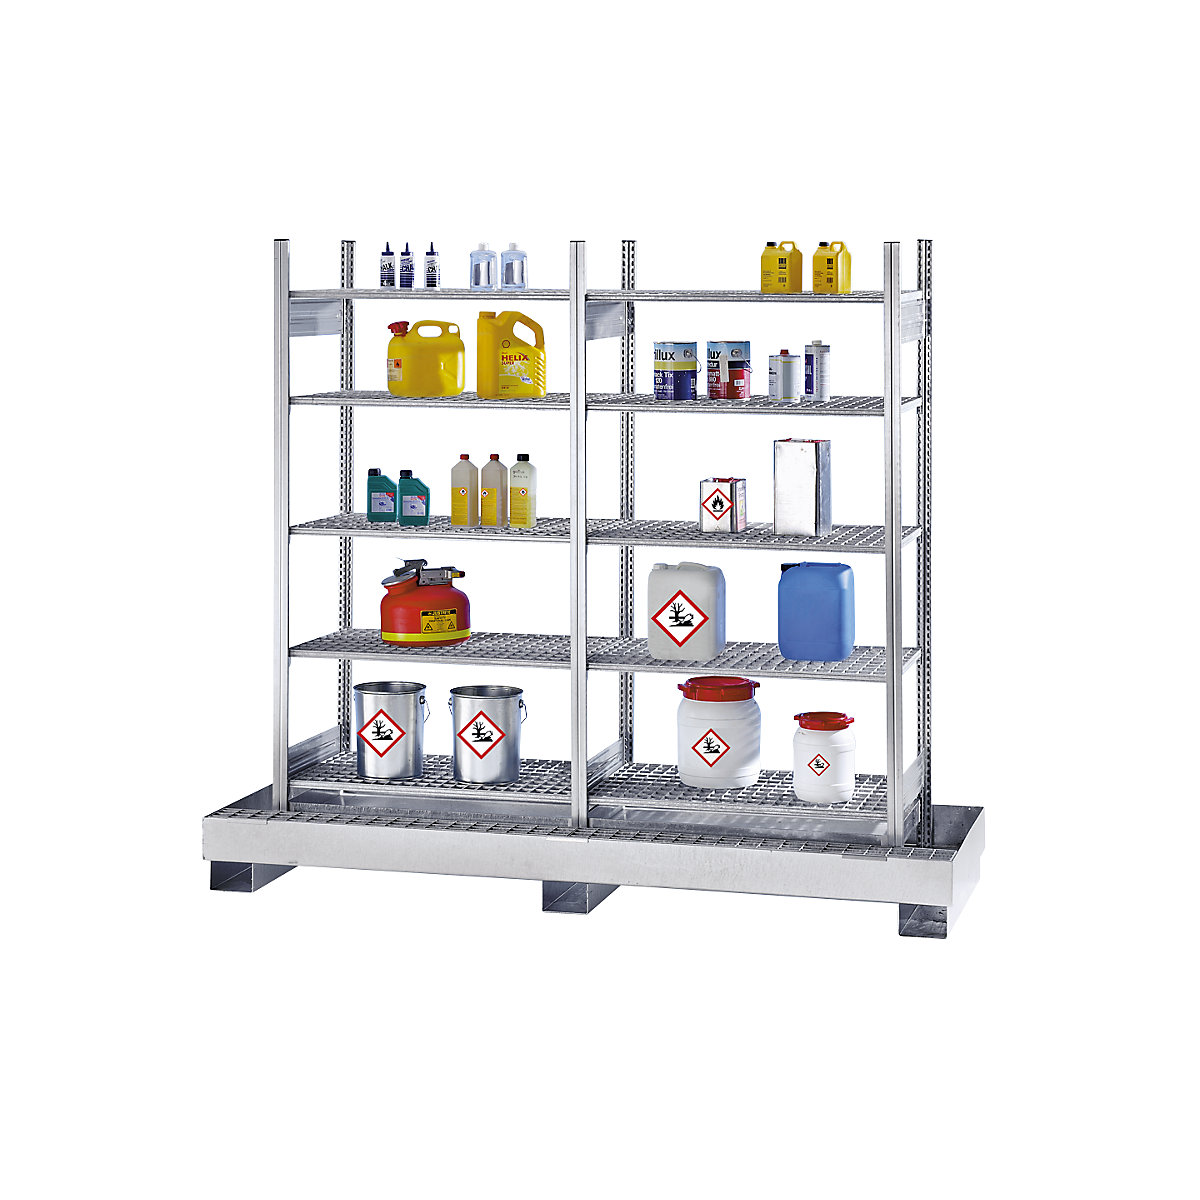 Hazardous goods shelving for small containers, for water hazardous and flammable media, 8 mesh shelves, 1 base sump tray, sump tray hot dip galvanised